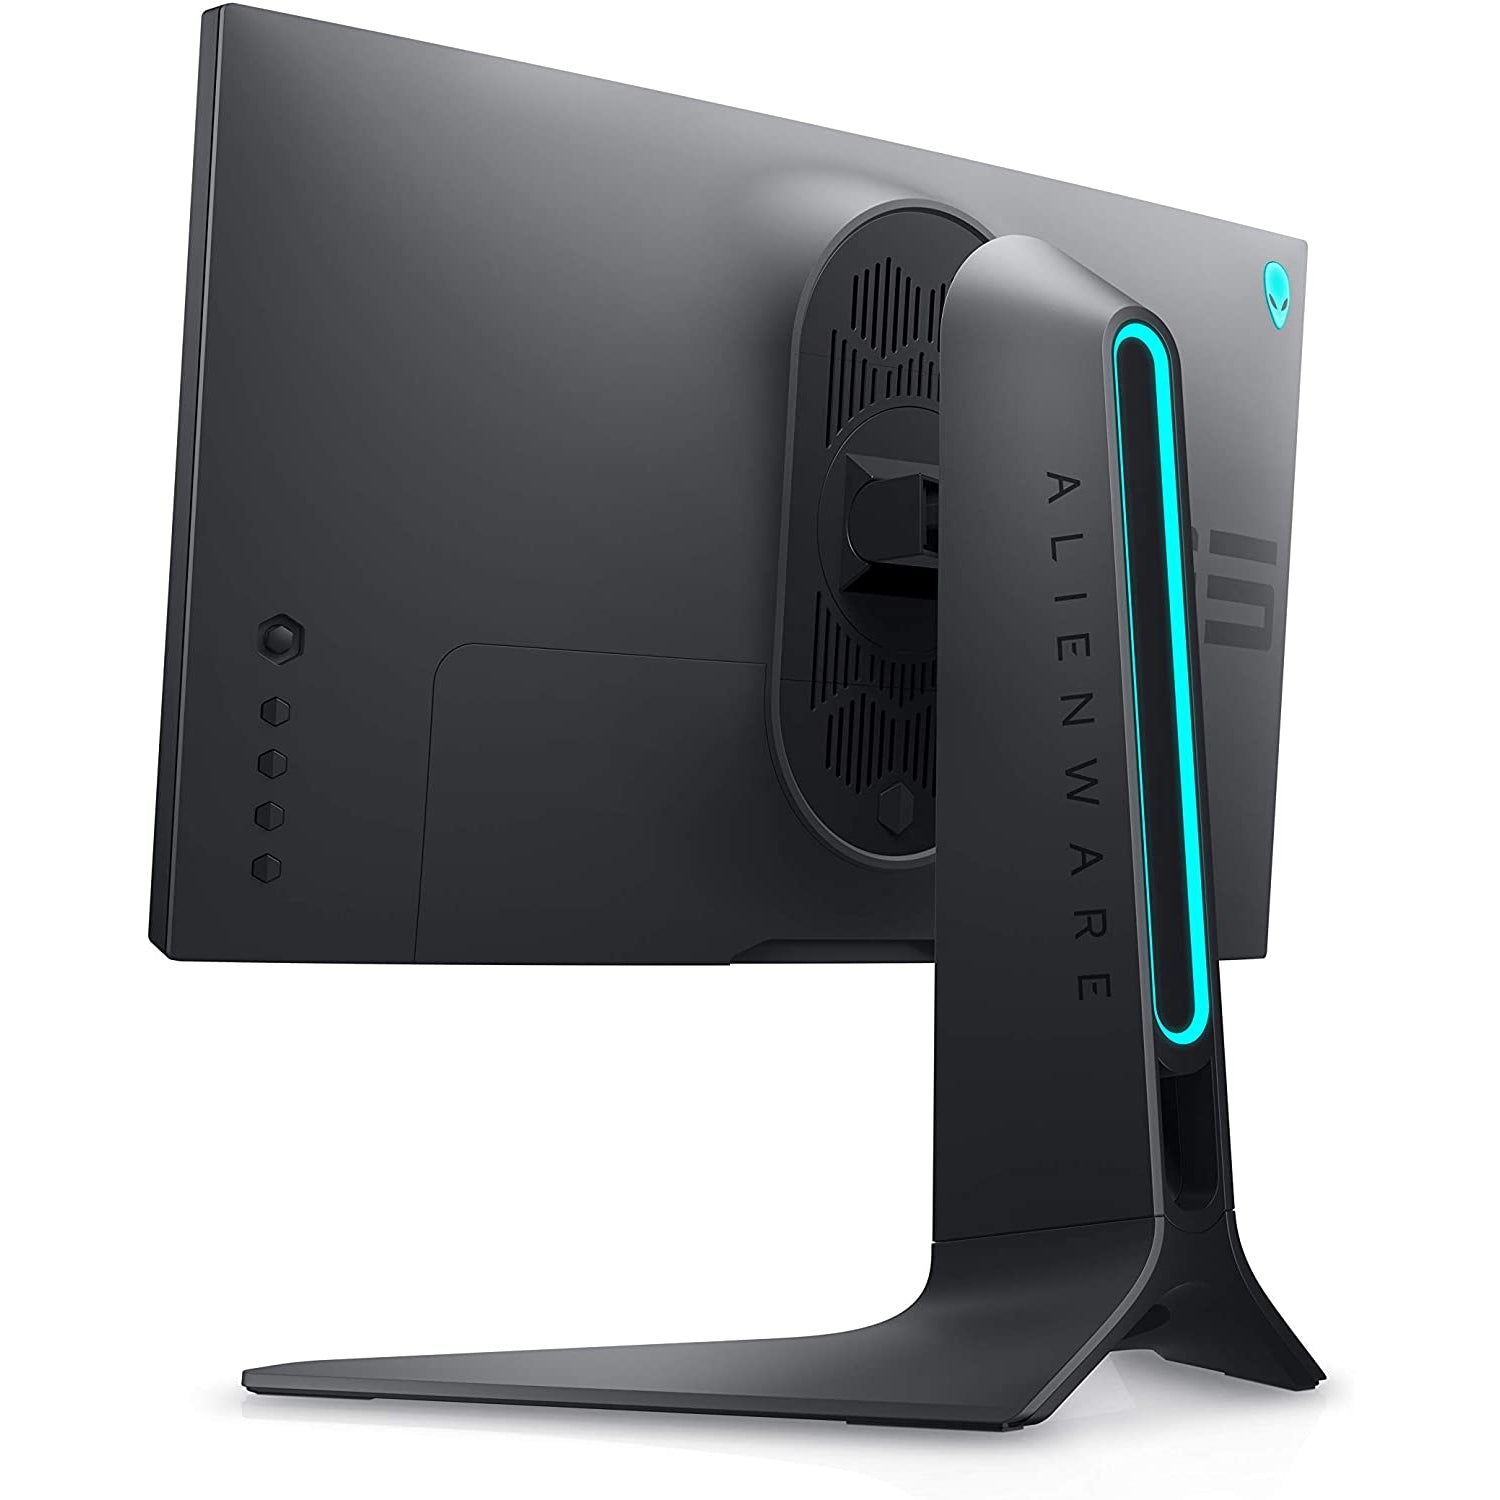 Alienware AW2521HF 24.5 inch Full HD (1920x1080) Gaming Monitor, 240Hz, IPS, 1ms